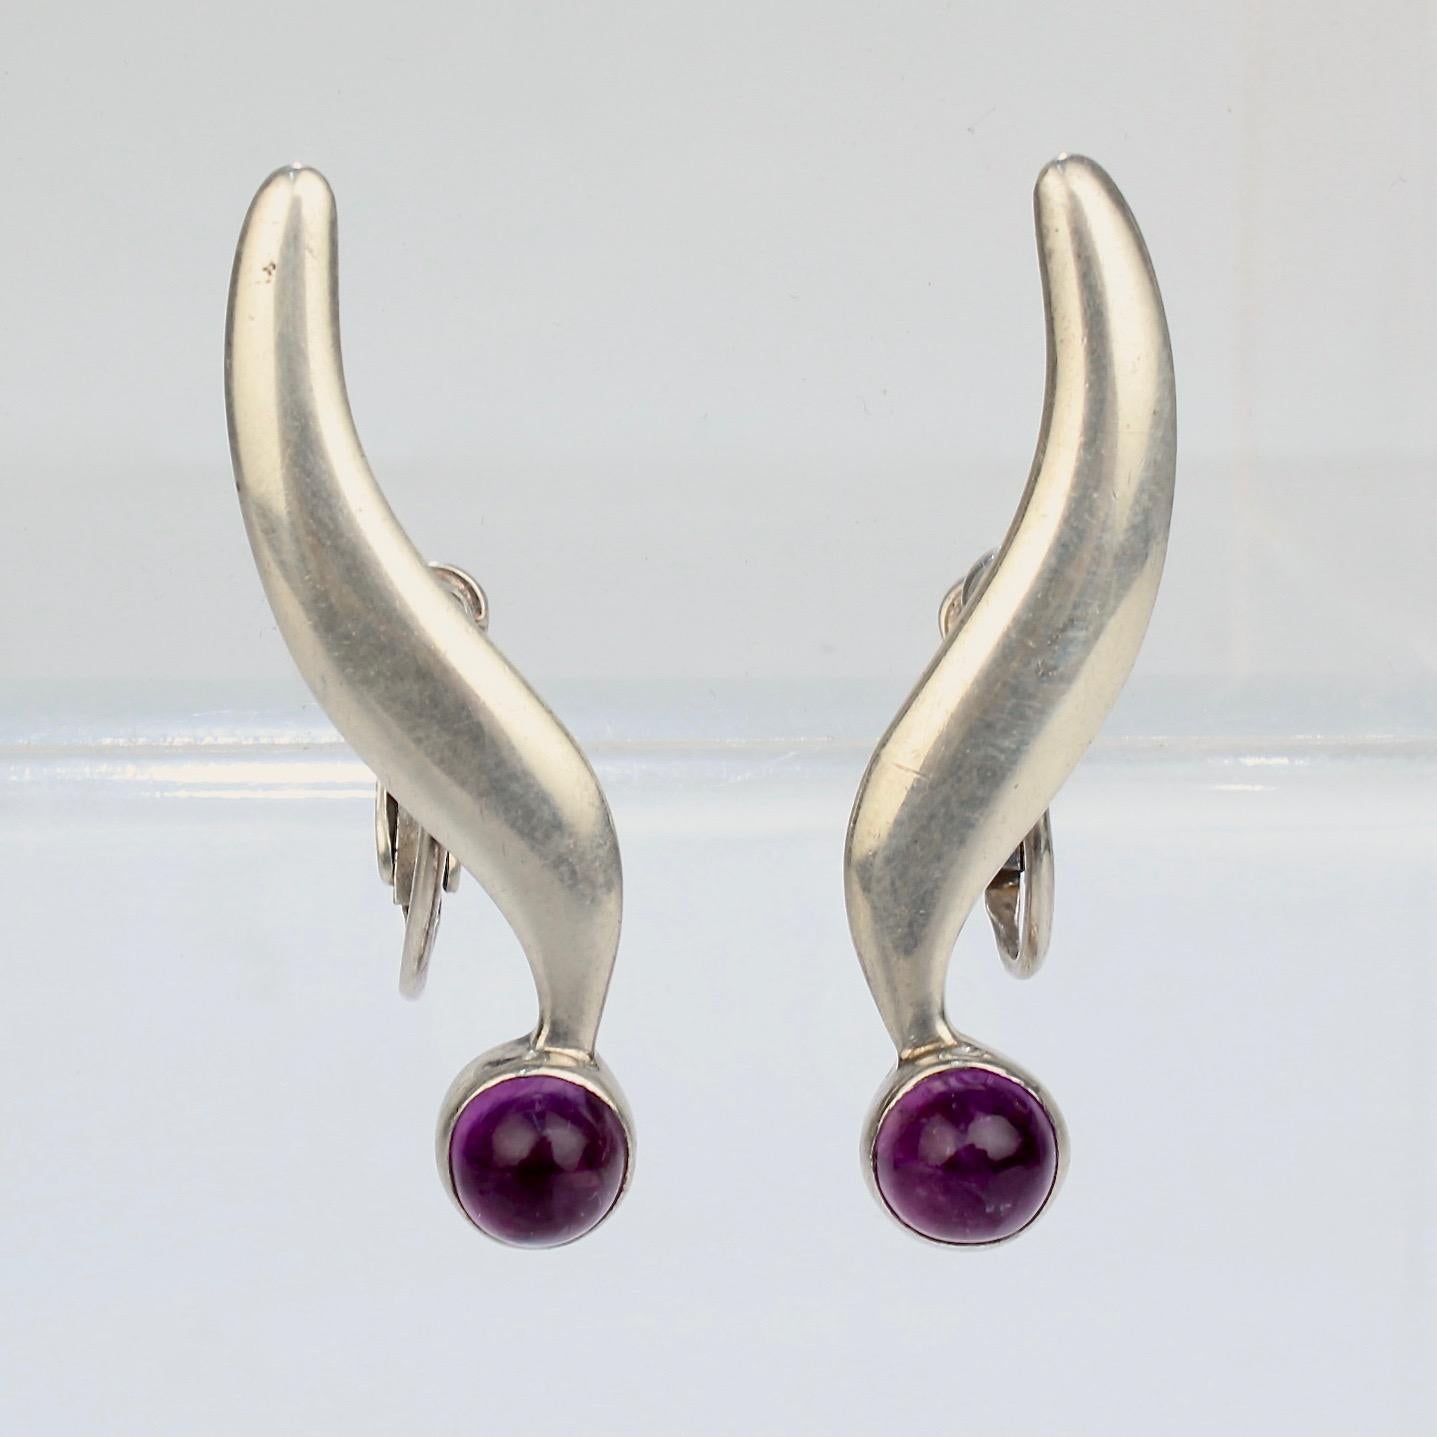 A fine pair of vintage Modernist Mexican screw back earrings.

Signed Sigi.

In sterling silver earrings with smooth round amethyst cabochons. 

Marked on reverse: STERLING and Mexico, HECHO, SIGI, TASCO and 810.

Date:
Mid-20th Century

Overall